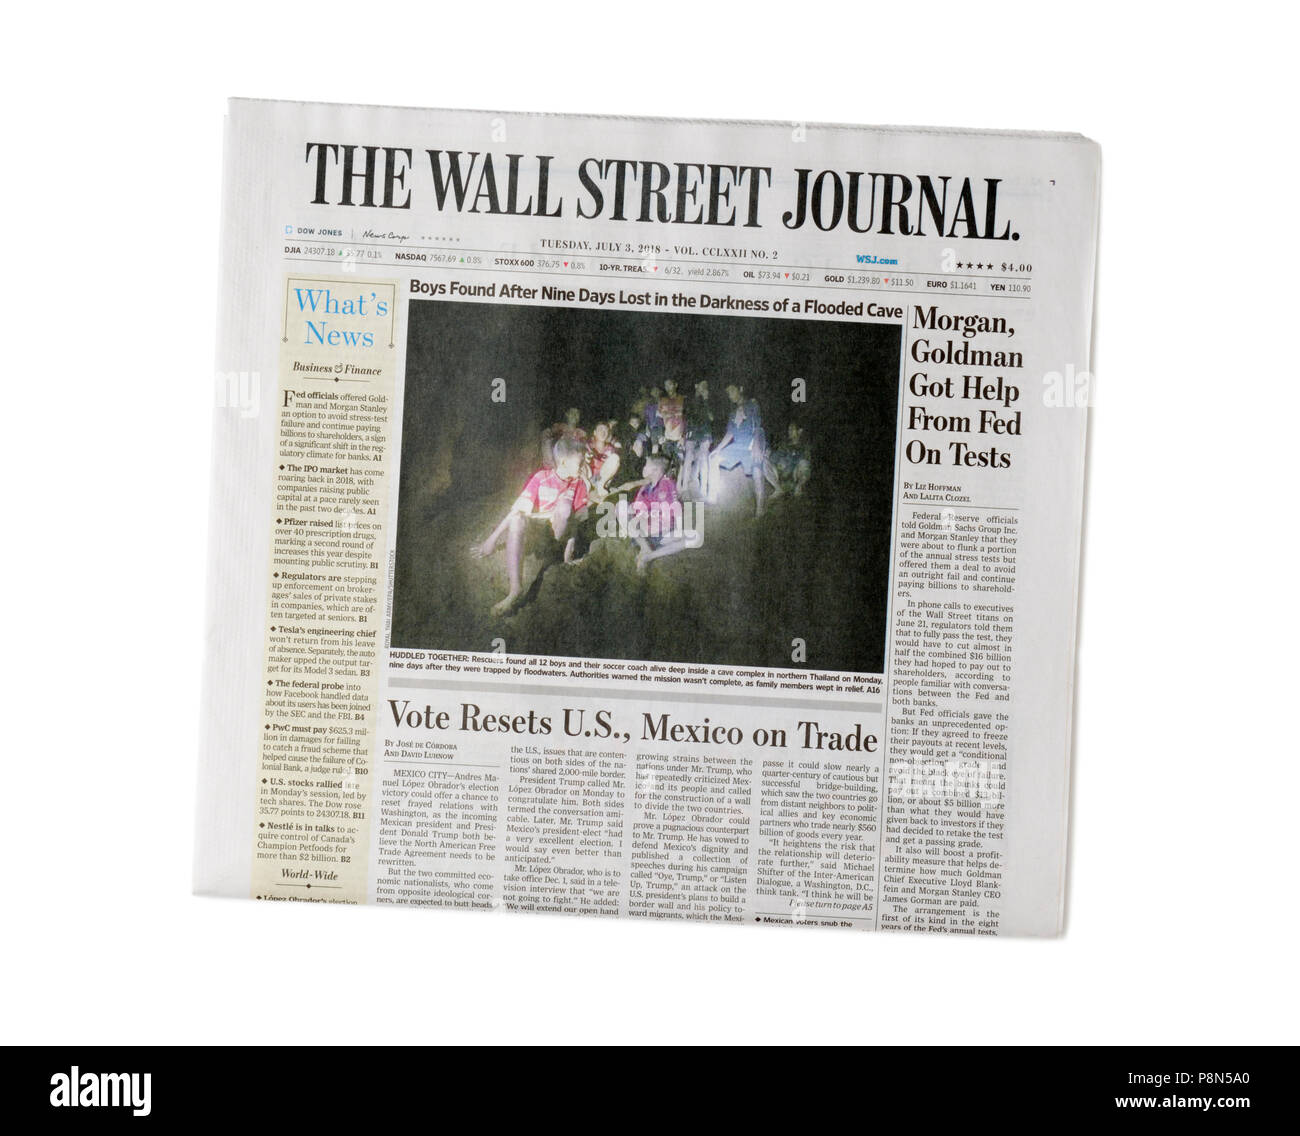 Journal, Wall Street Journal, front page, édition d'impression Banque D'Images